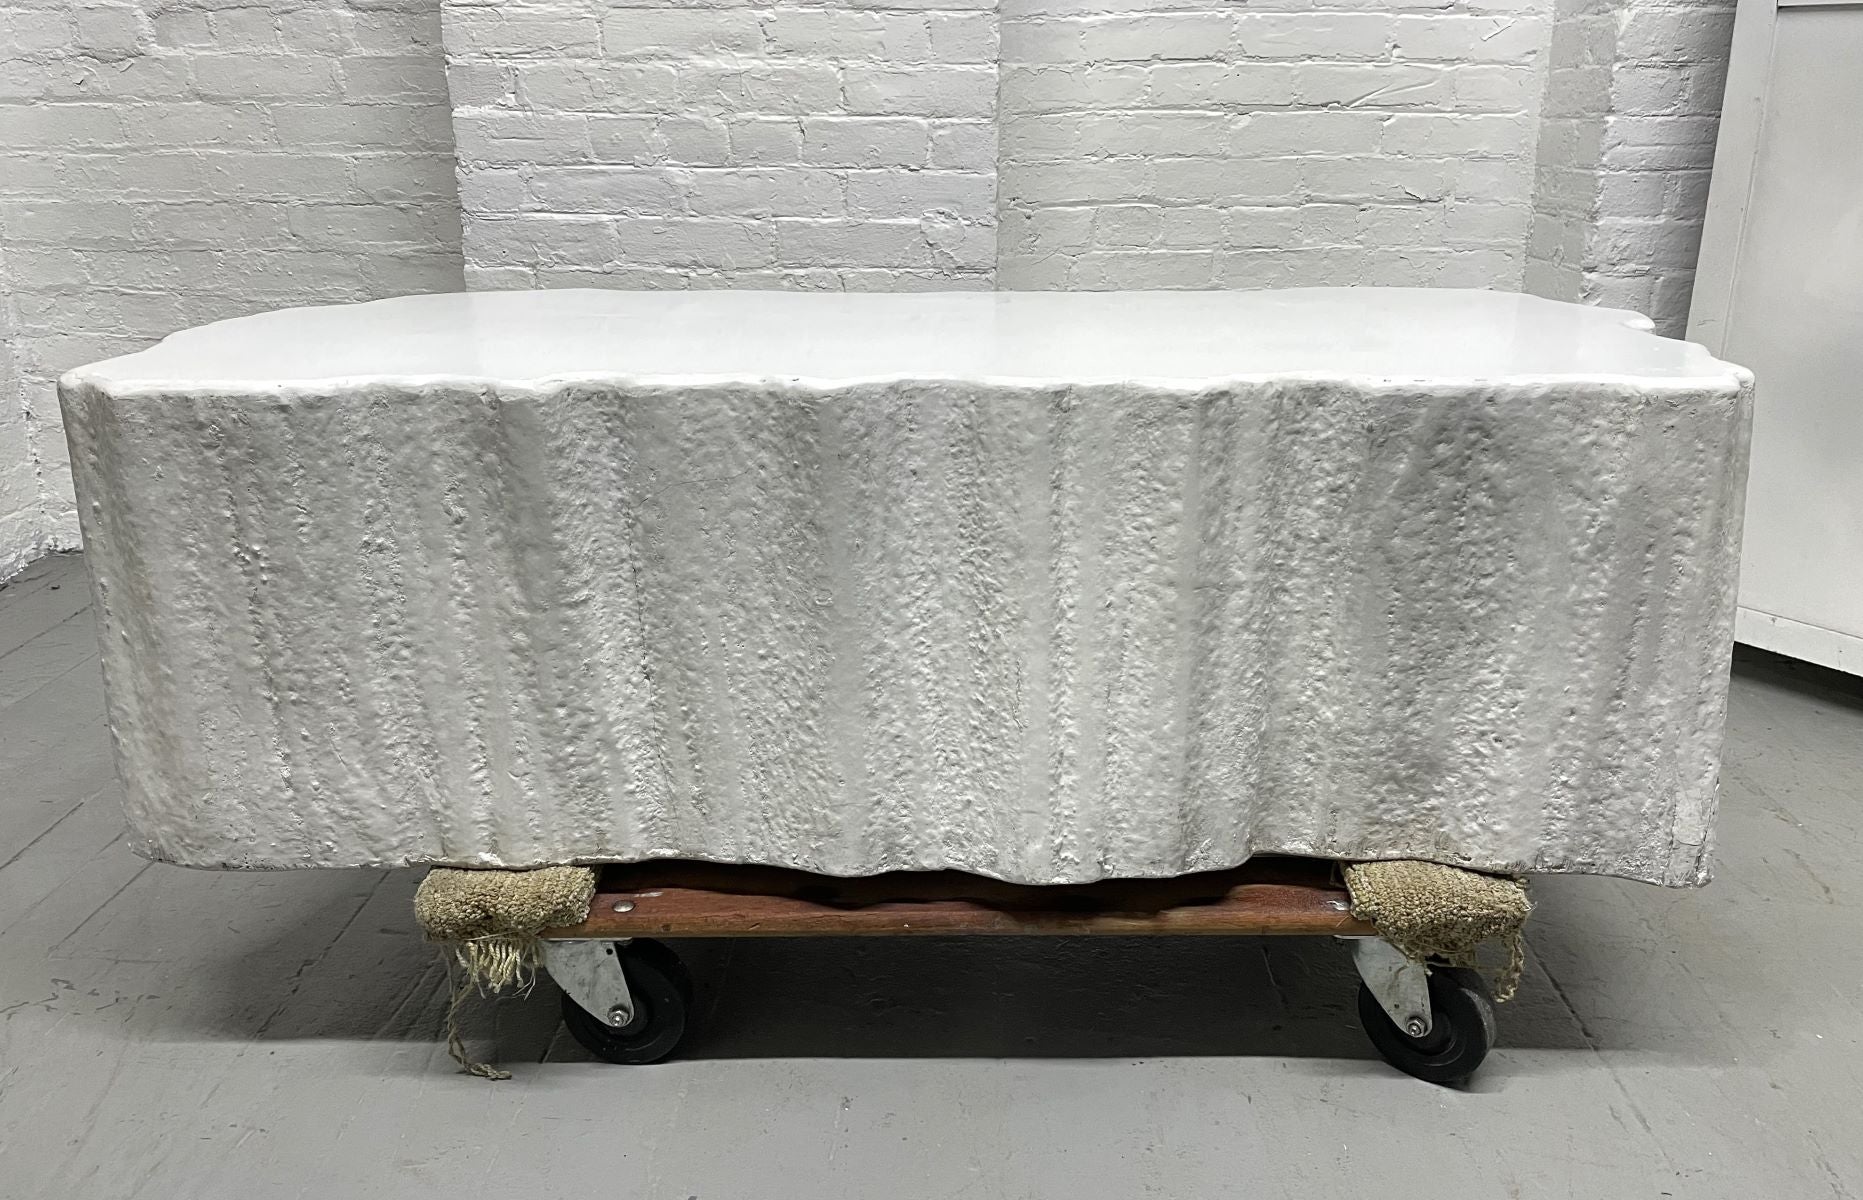 1960s Organic shaped coffee table with a resin top and textured plaster edges. The inside of the entire coffee table is stone. Can be used inside or outdoors.